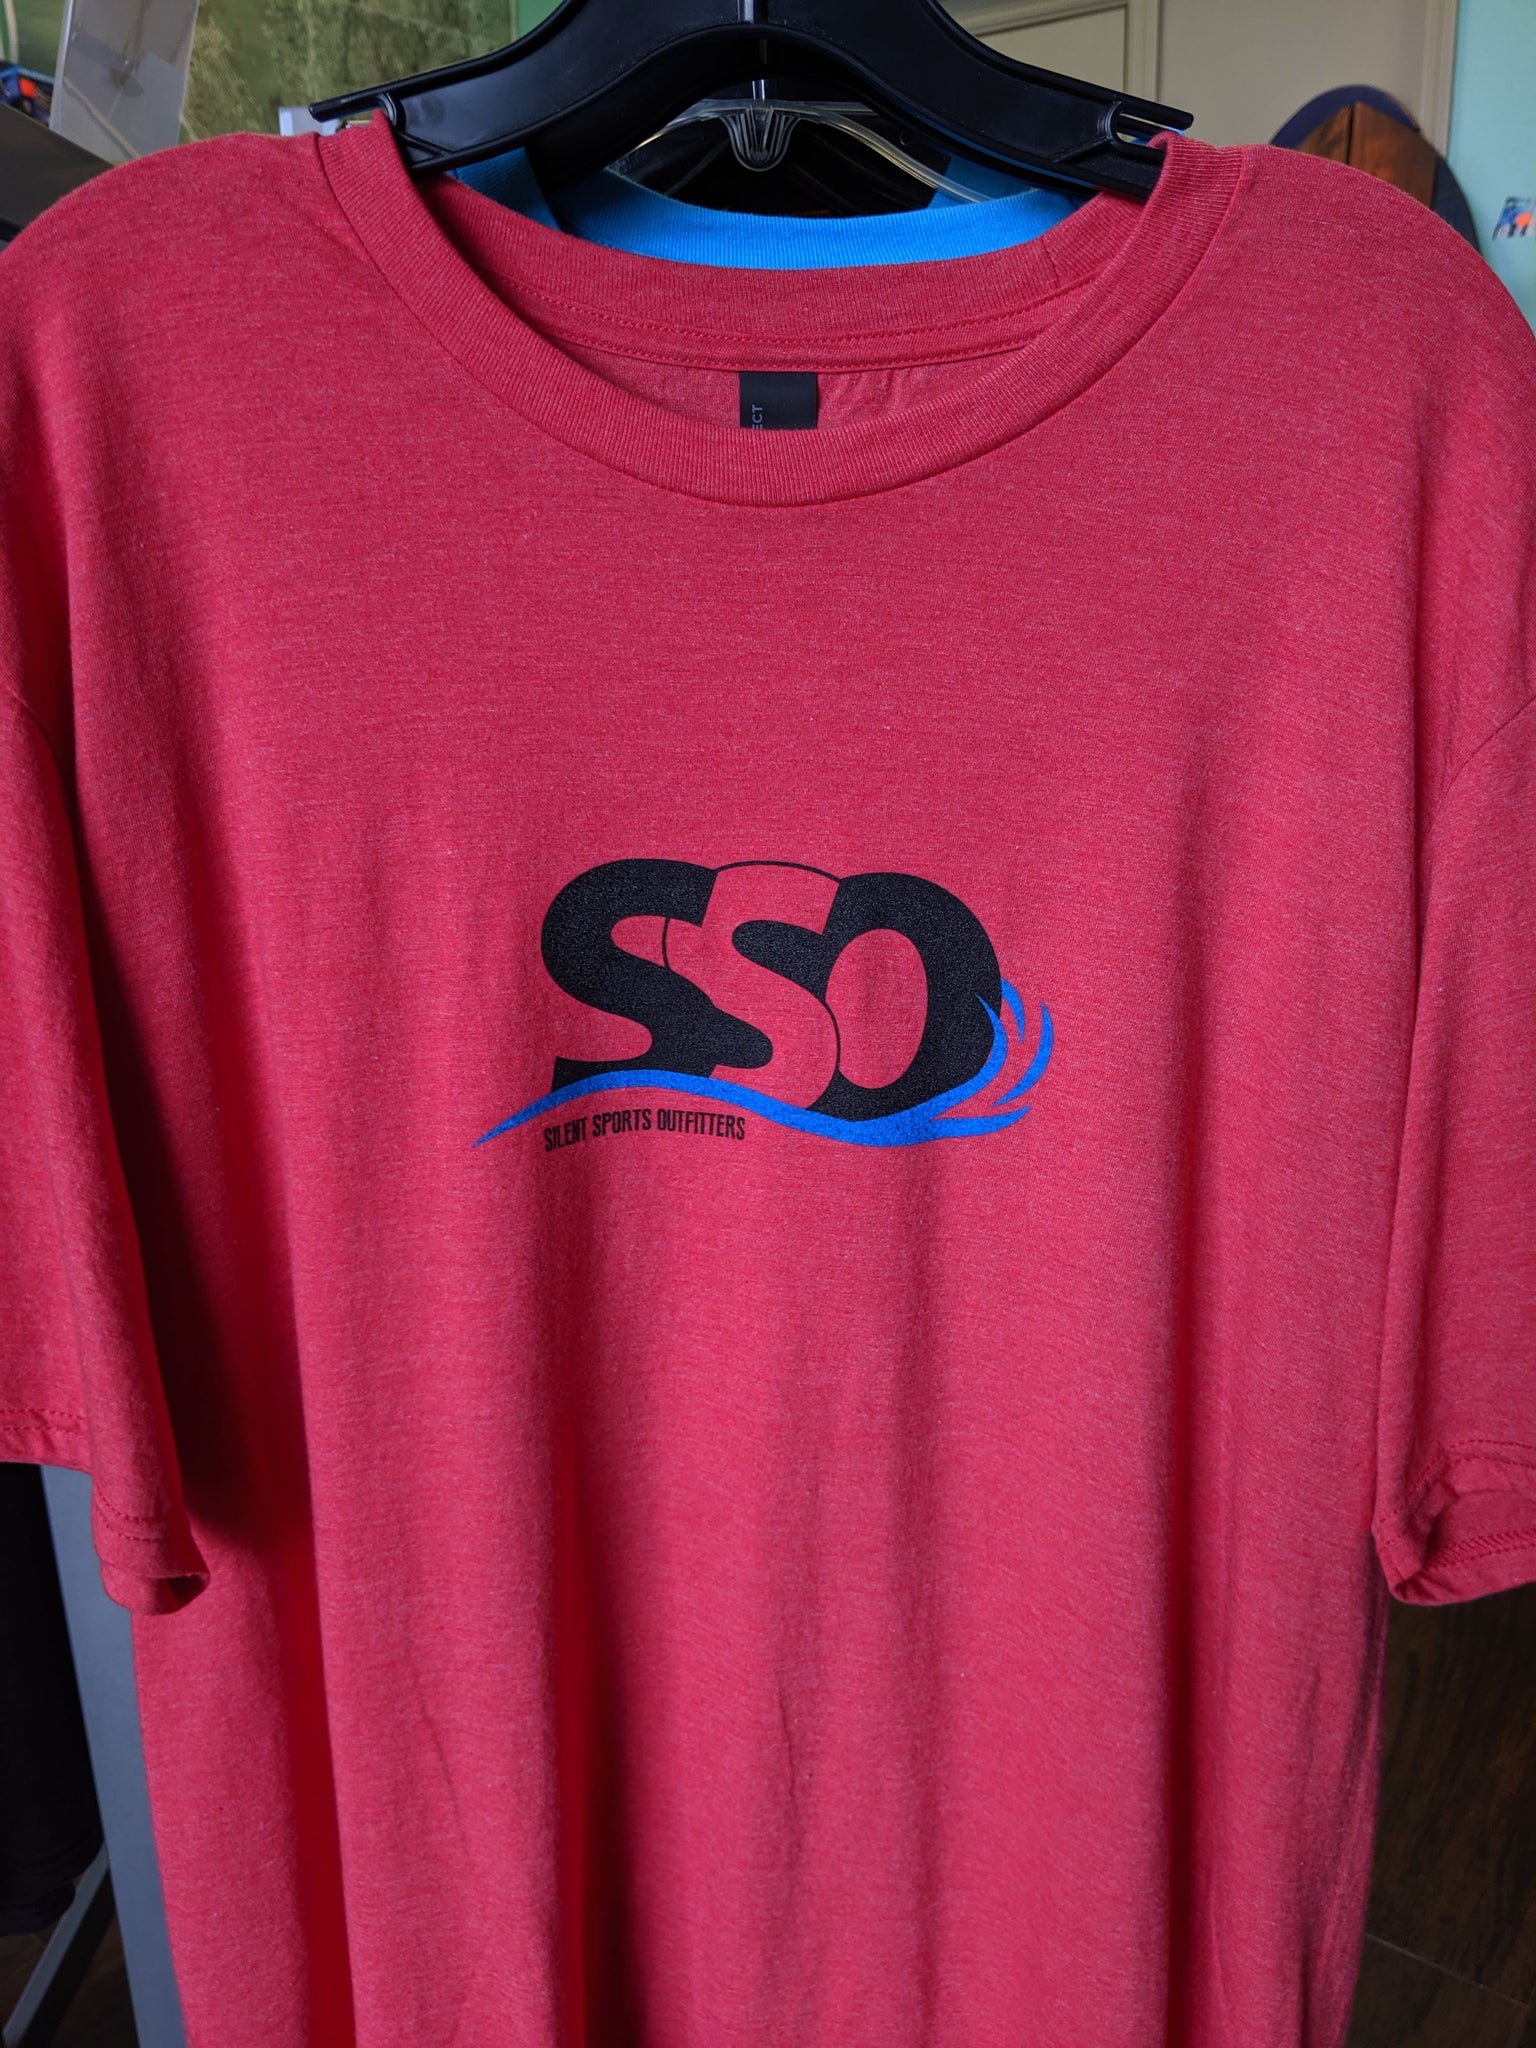 SSO T-Shirt – Silent Sports Outfitters